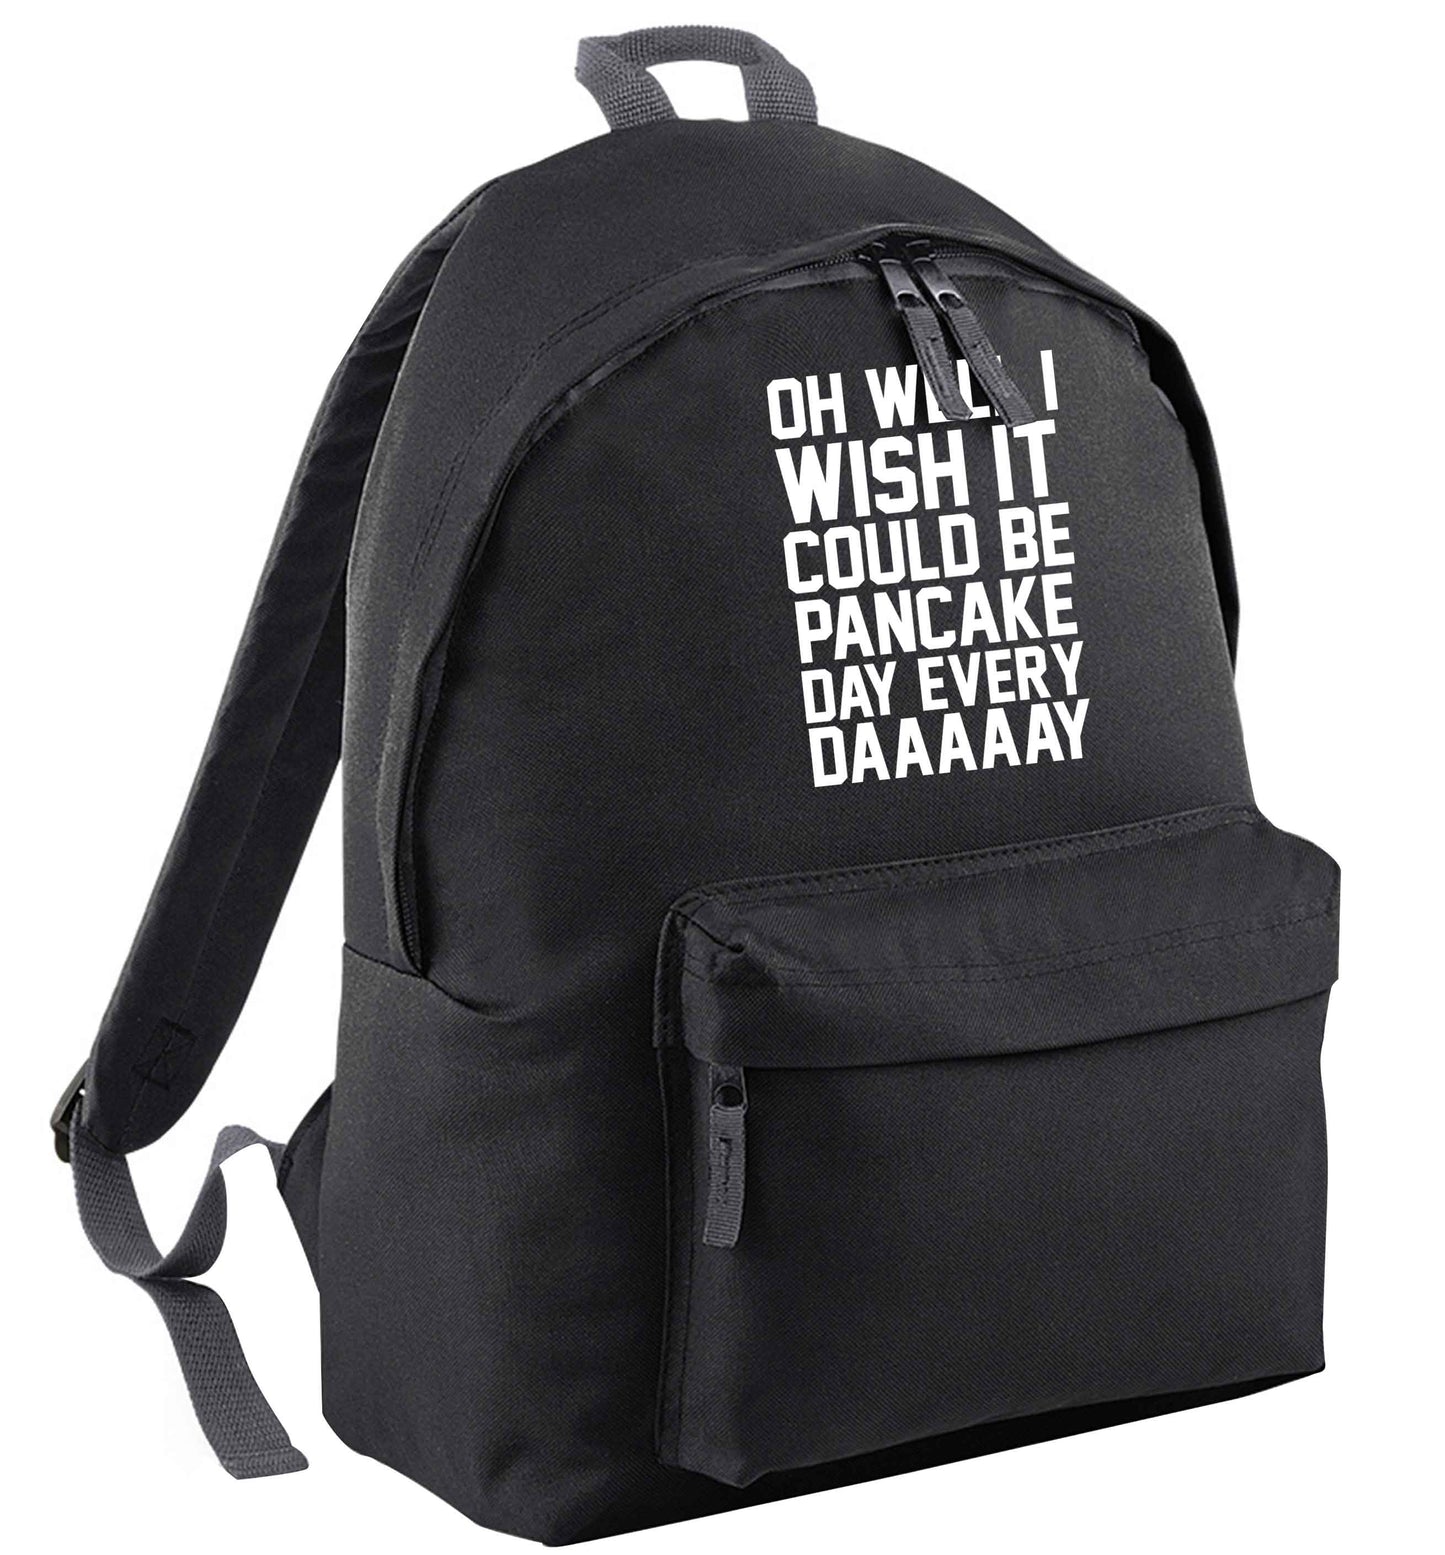 Oh well I wish it could be pancake day every day | Children's backpack